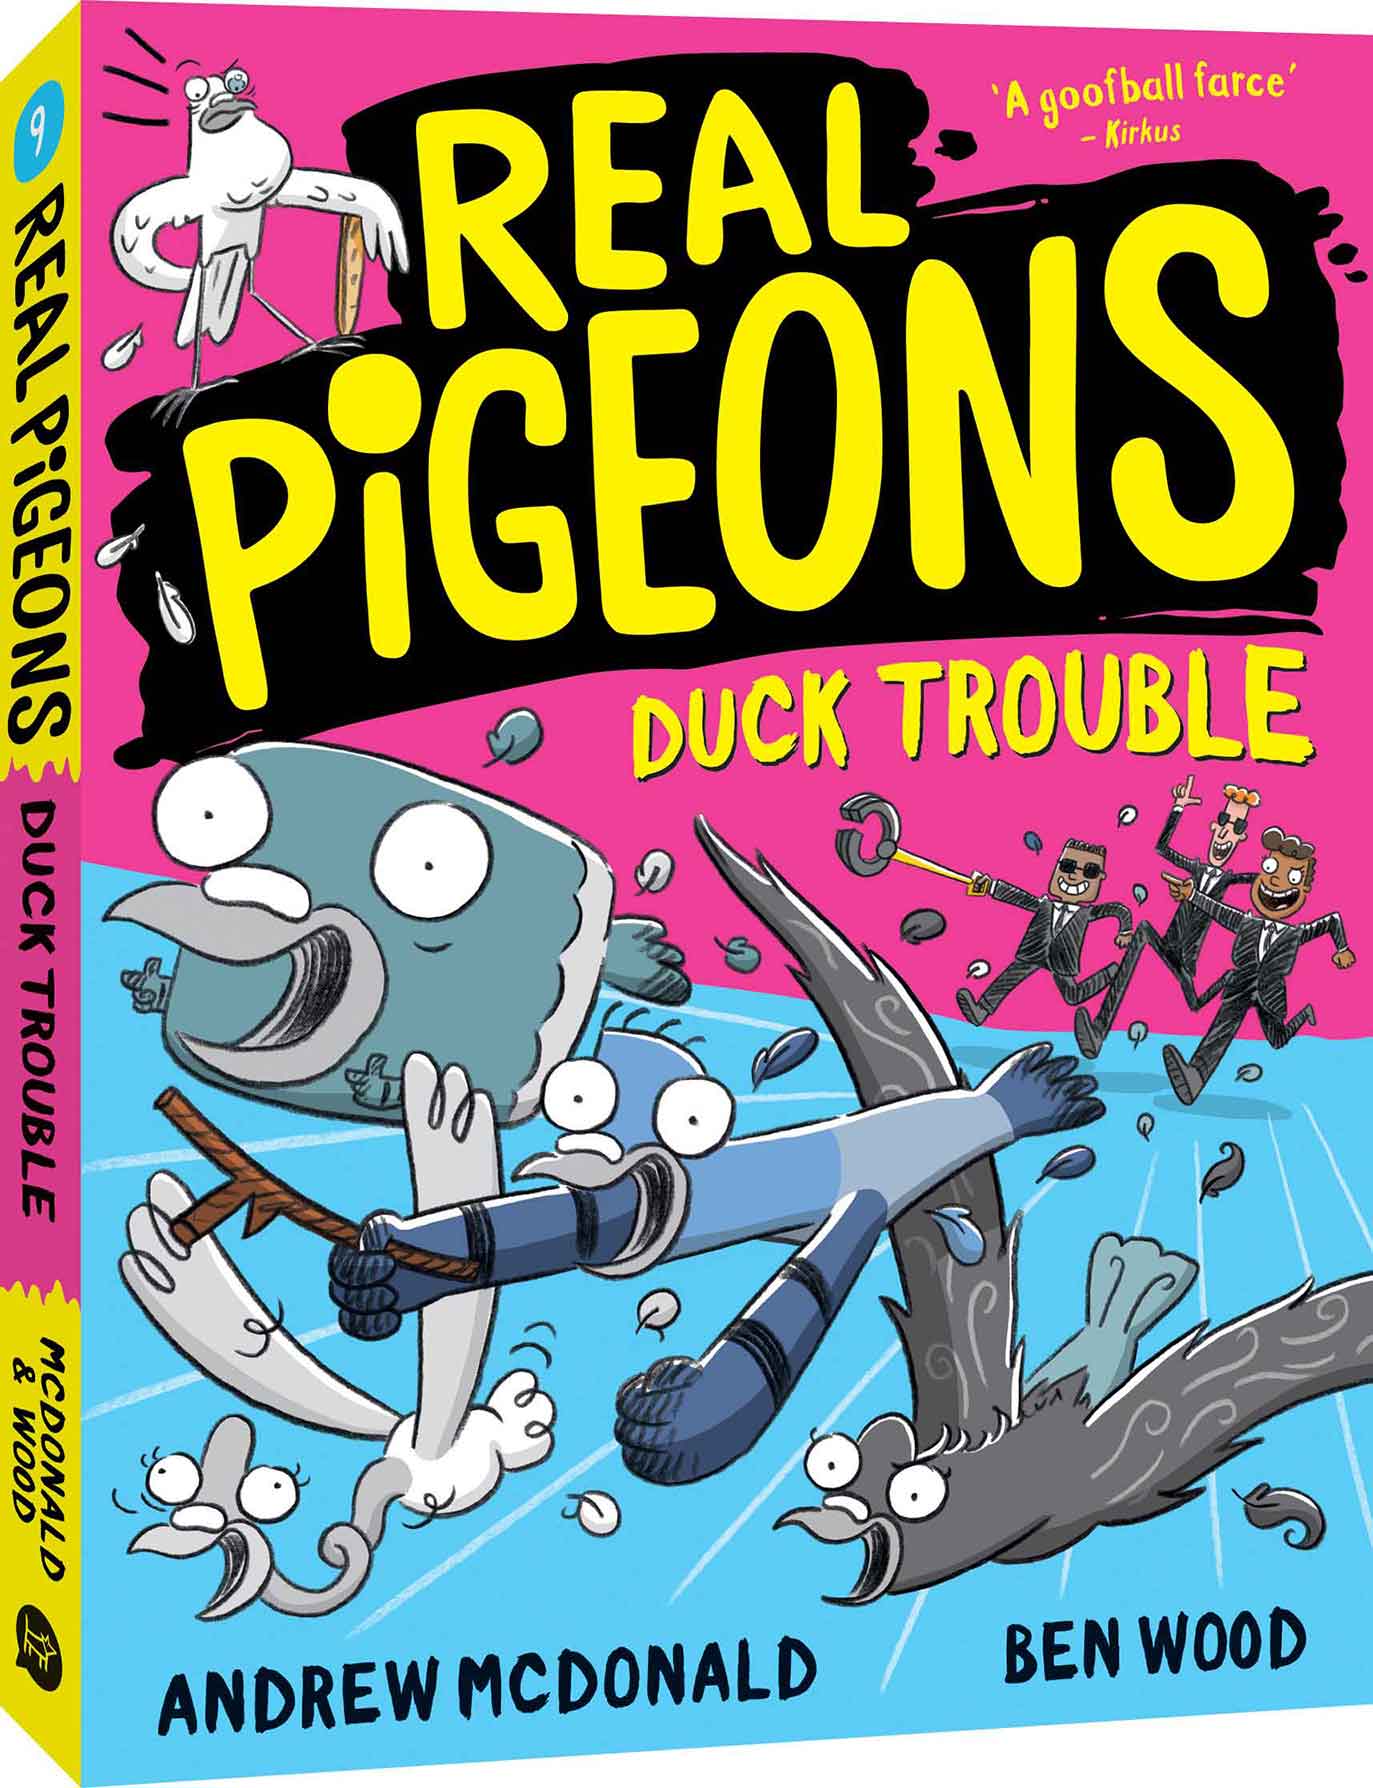 Real Pigeons Spy High (Book 8) – Andrew McDonald and Ben Wood